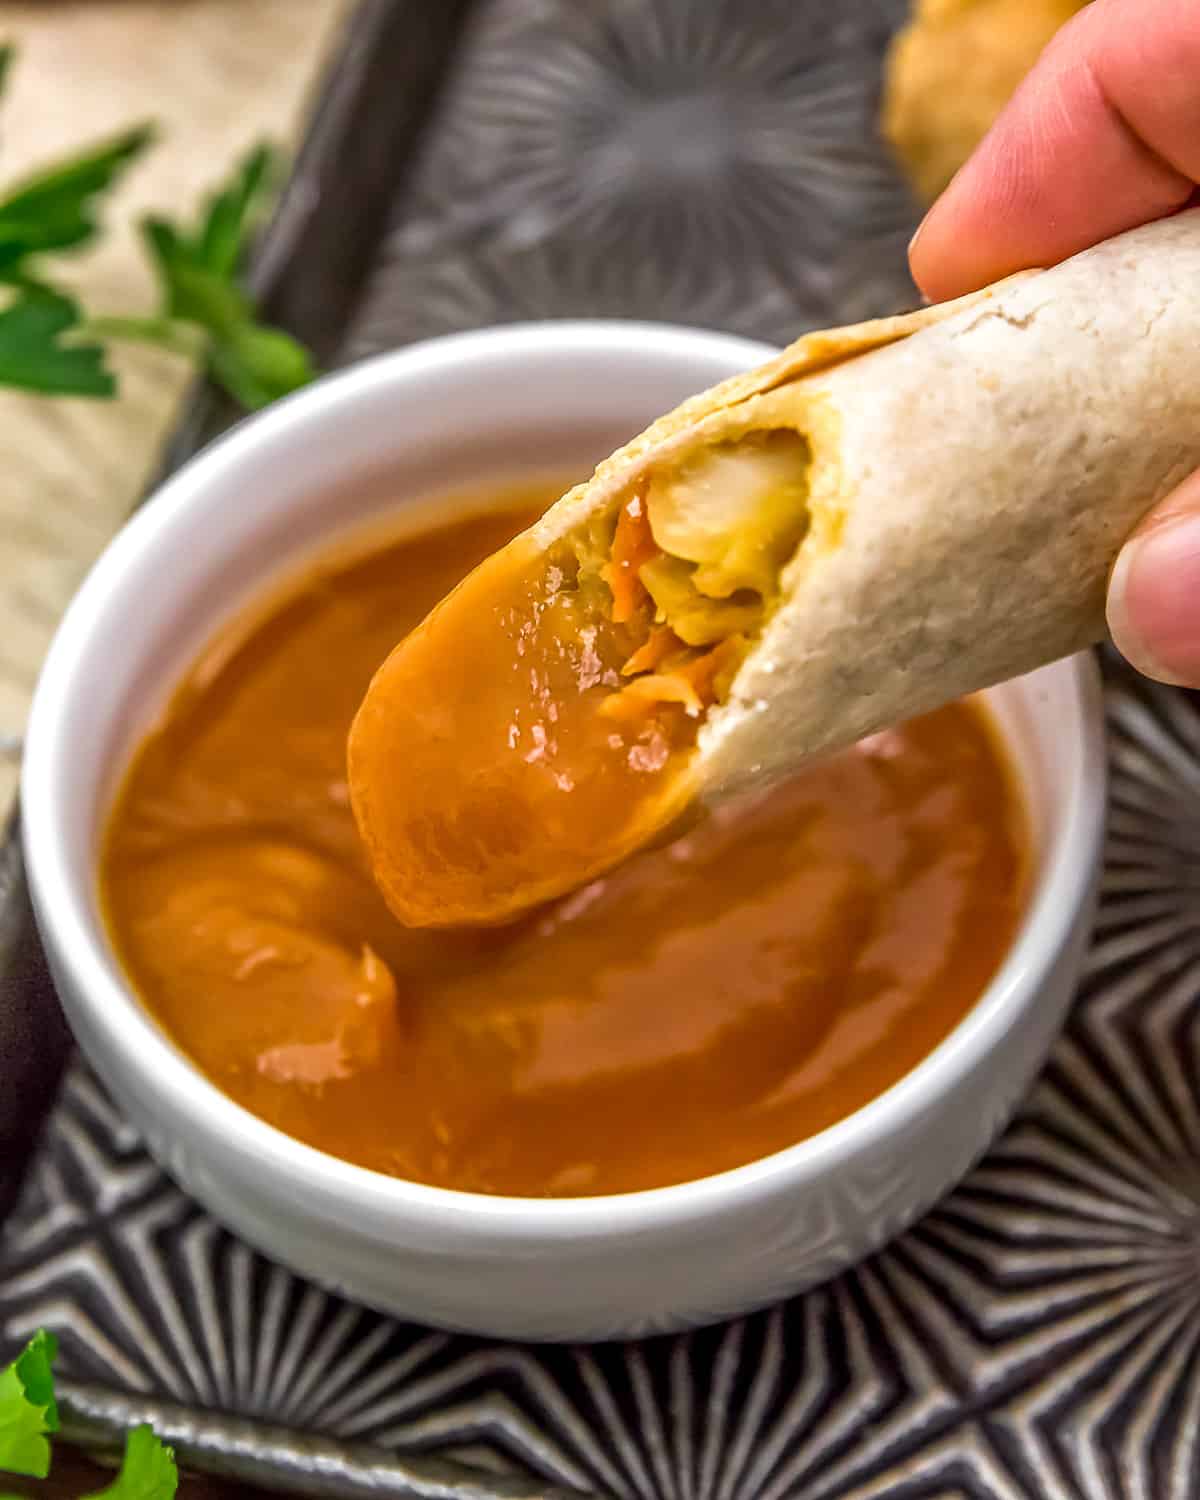 Vegan Egg Roll dipped in Sweet and Sour Sauce